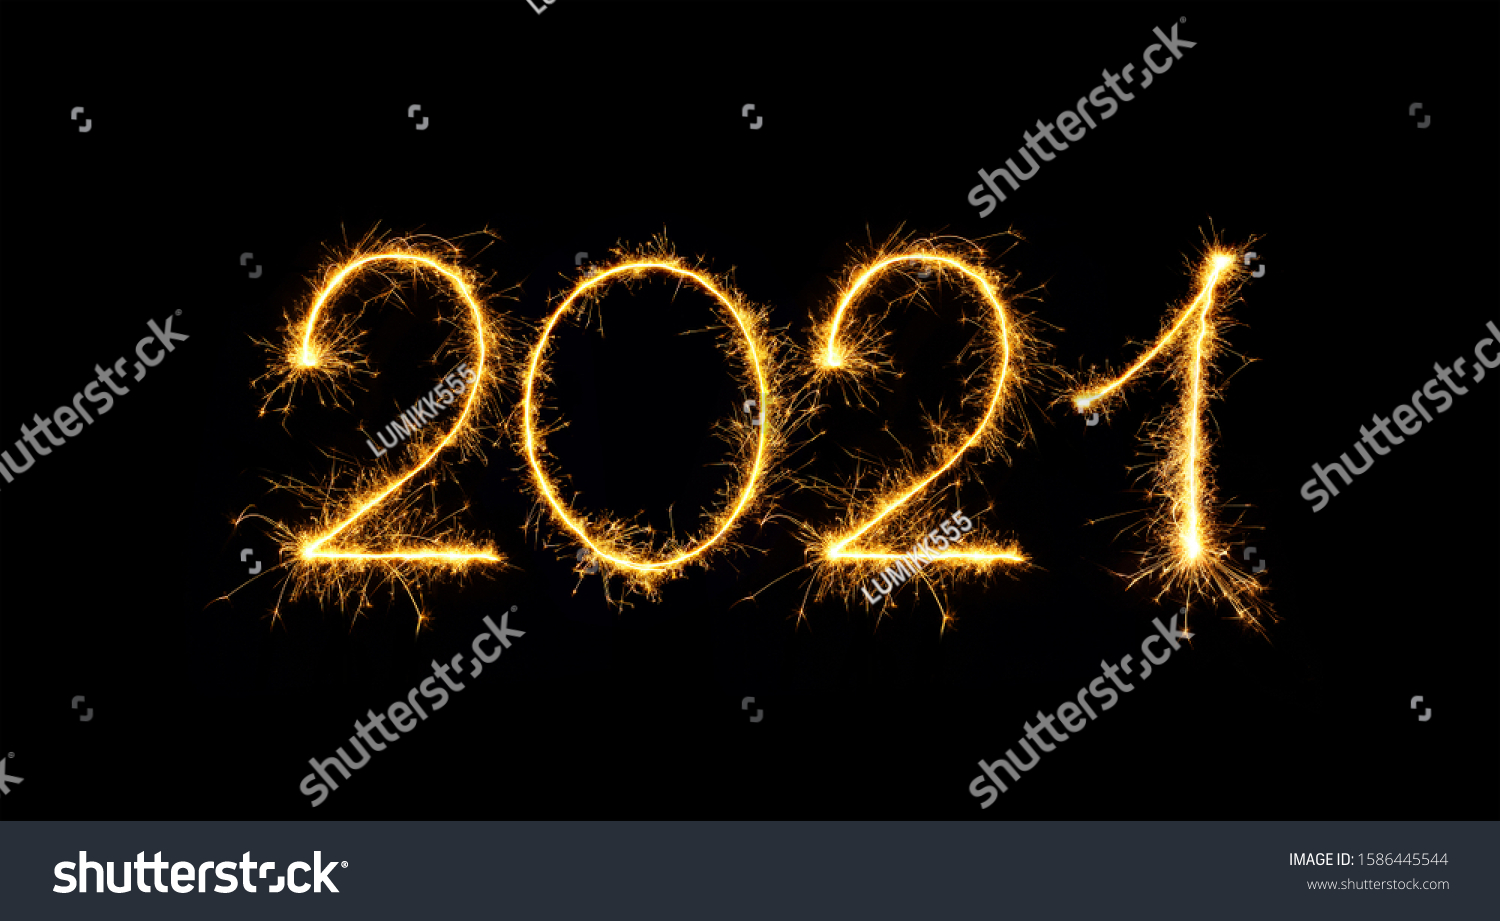 Happy New Year 2021. Sparkling burning numbers Year 2021 isolated on black background. Beautiful Glowing golden overlay object for design holiday greeting card, billboard and Web banner #1586445544